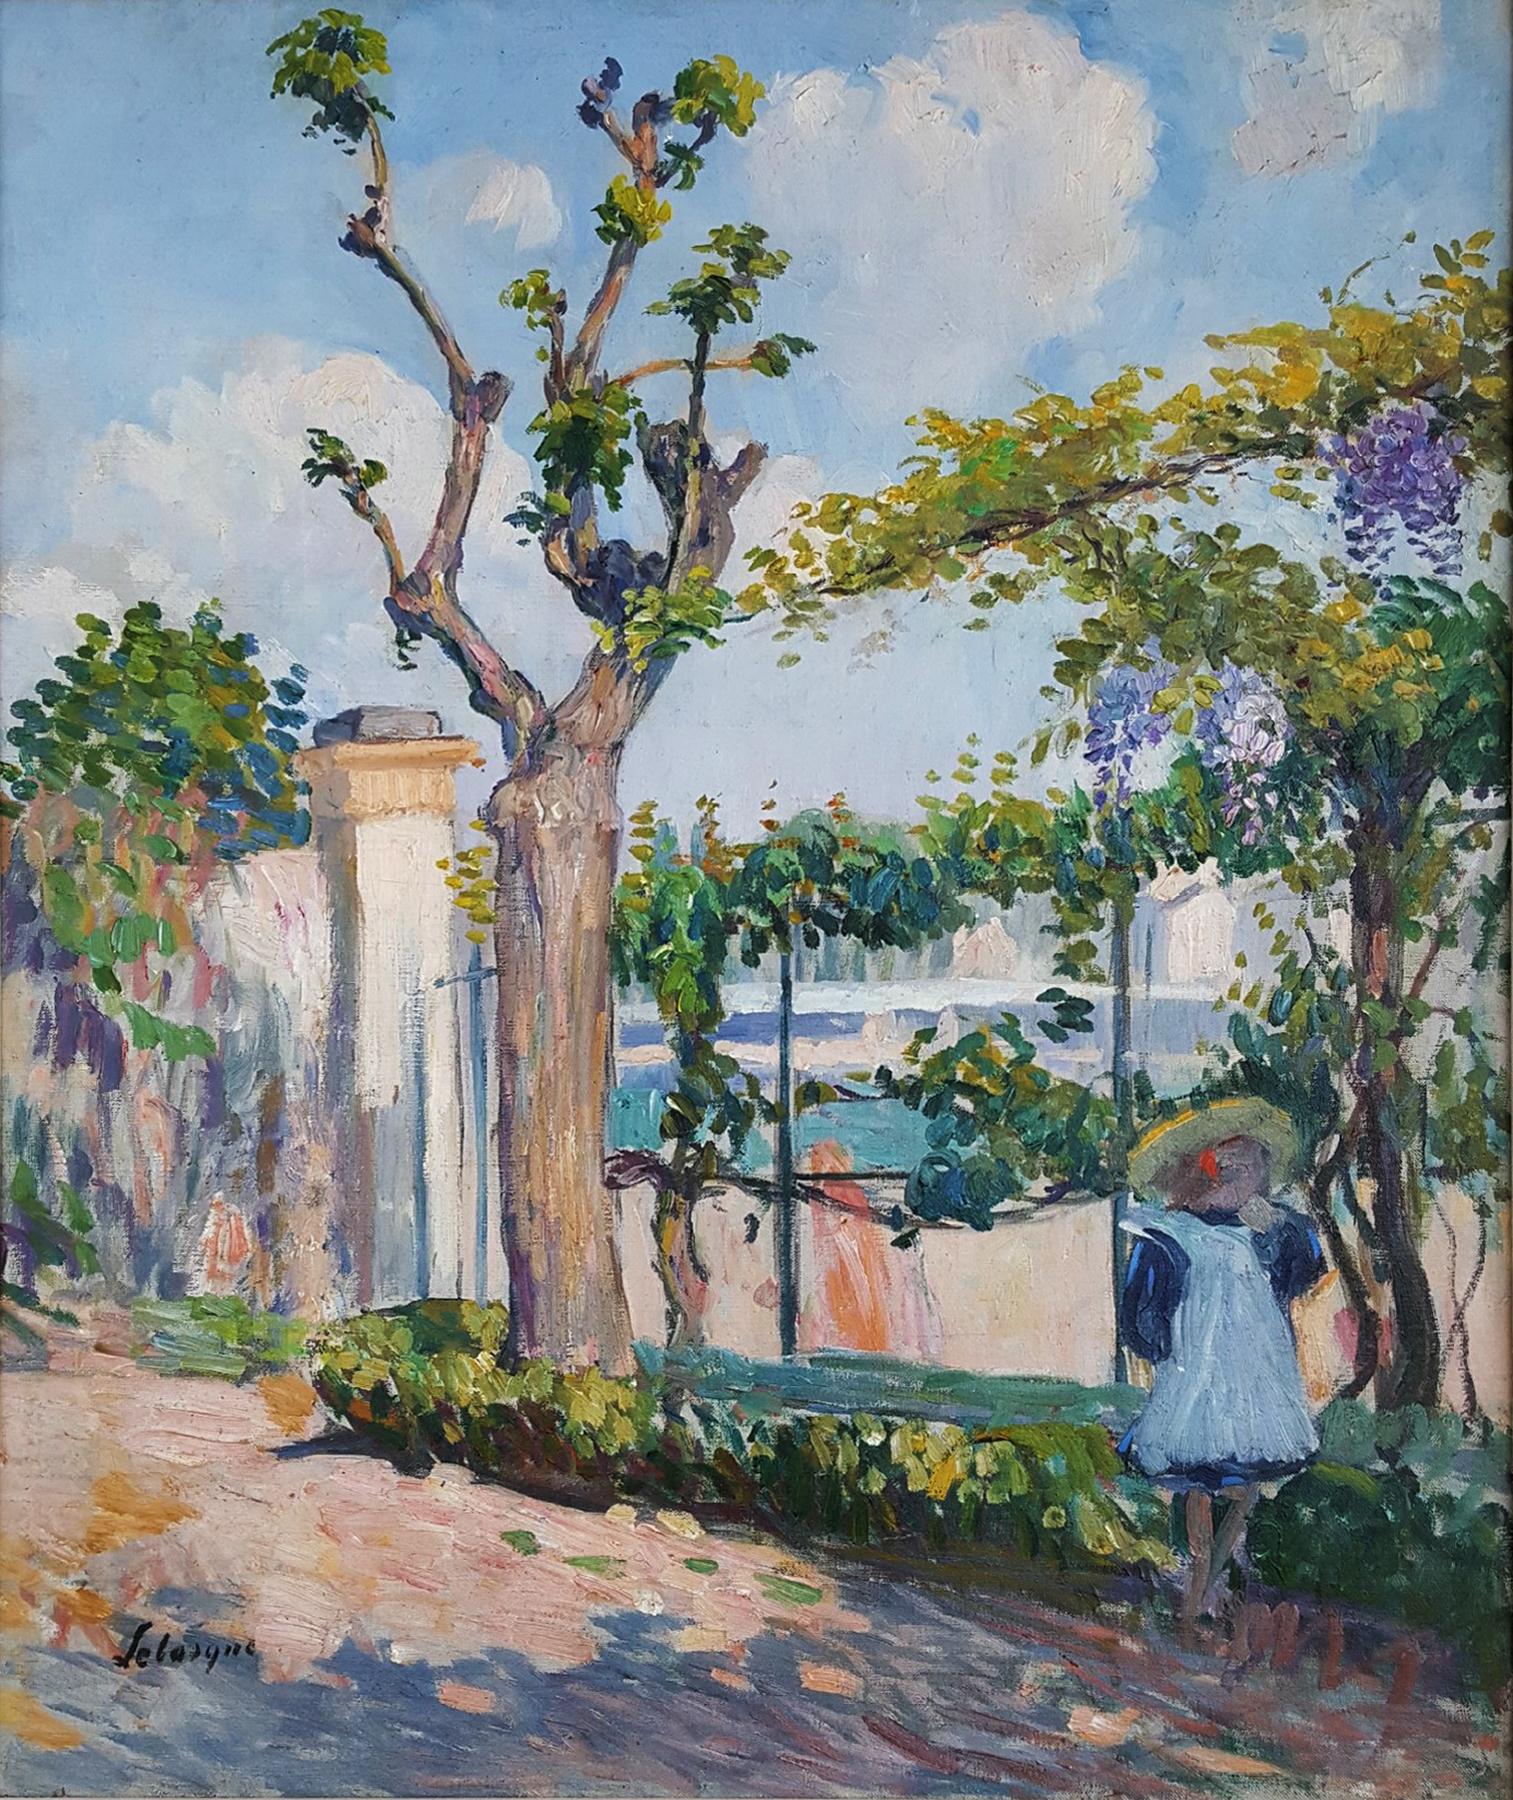 Le Jardin de Lagny - Garden with young girl  Post-impressionist  - Painting by Henri Lebasque